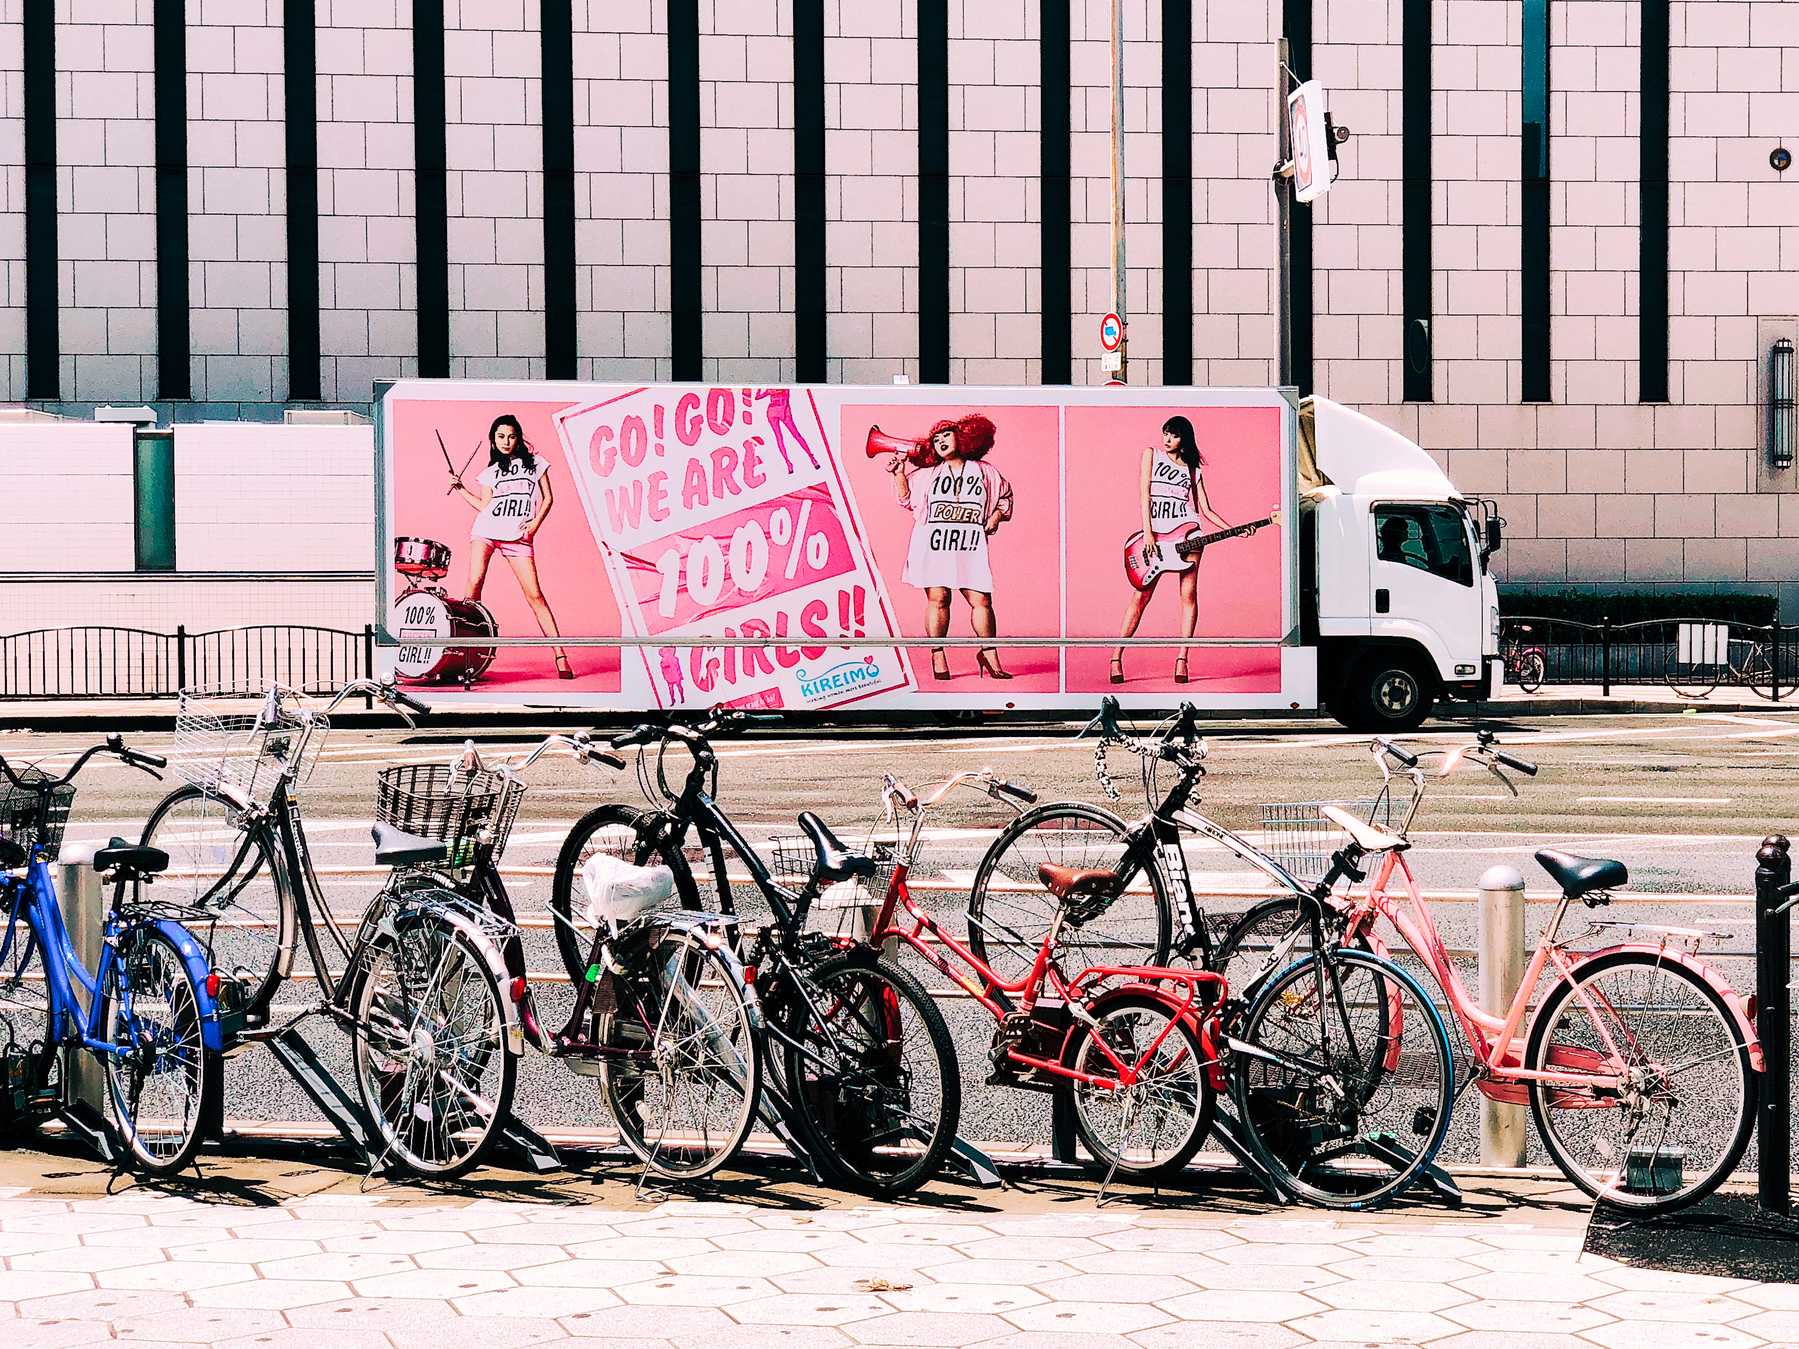 A truck with a pink ad for “Go! Go! We are 100% Girls!”, with a row of bicycles in the foreground. 